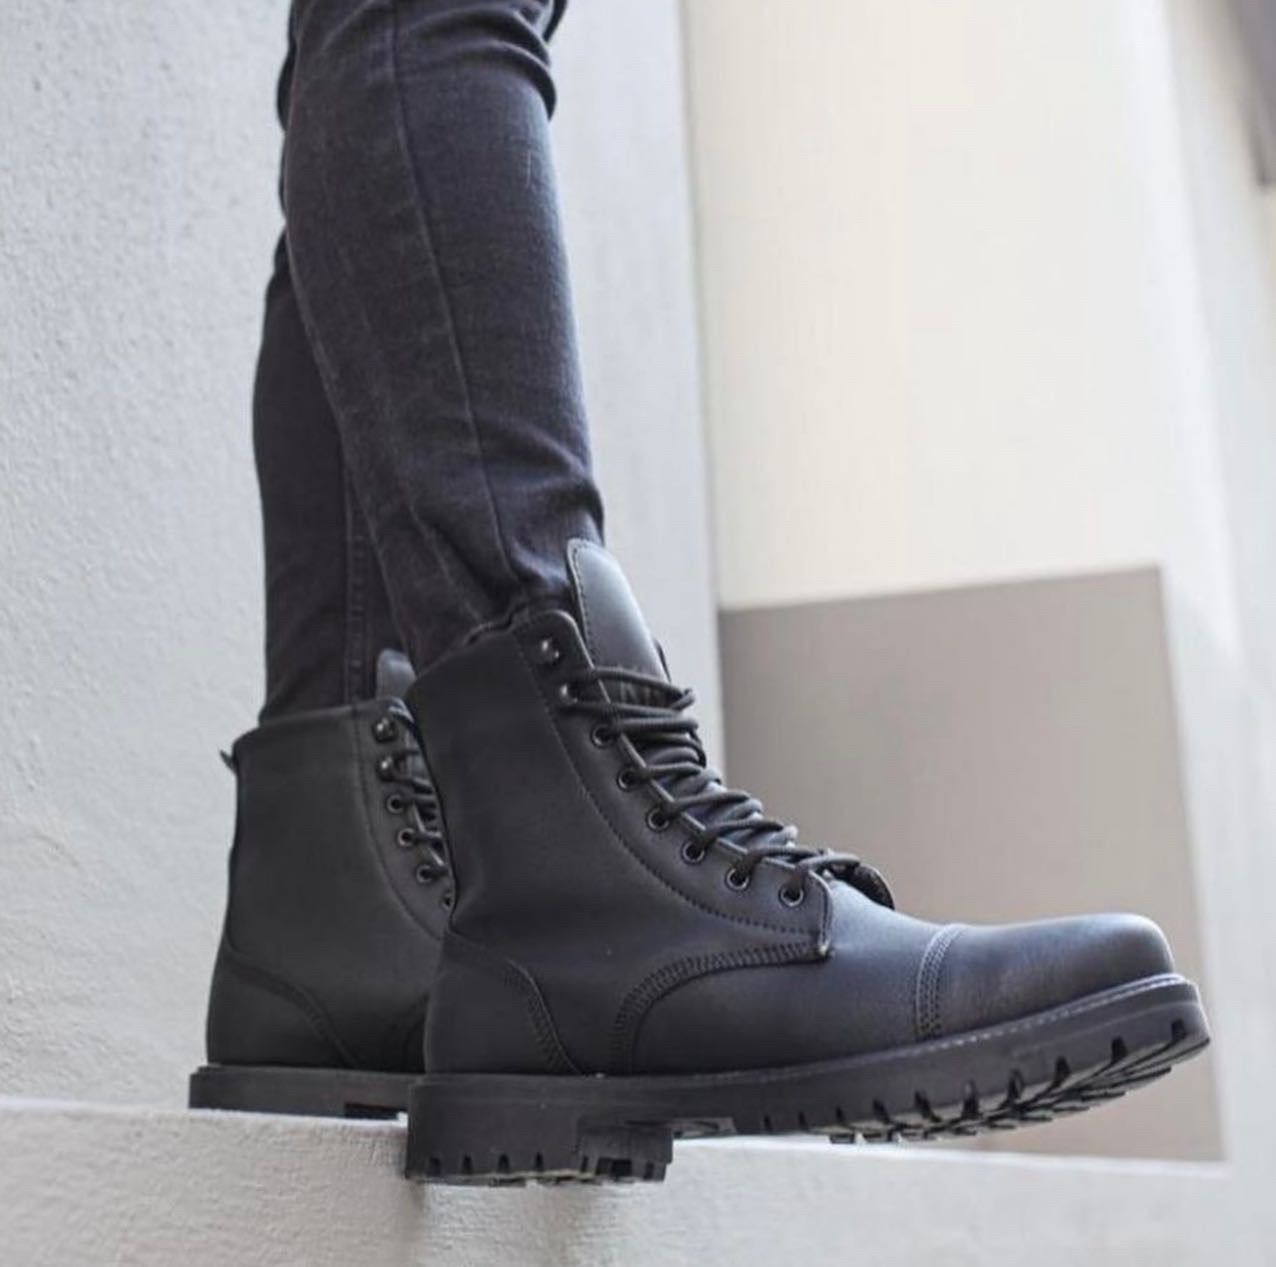 Knack Boots